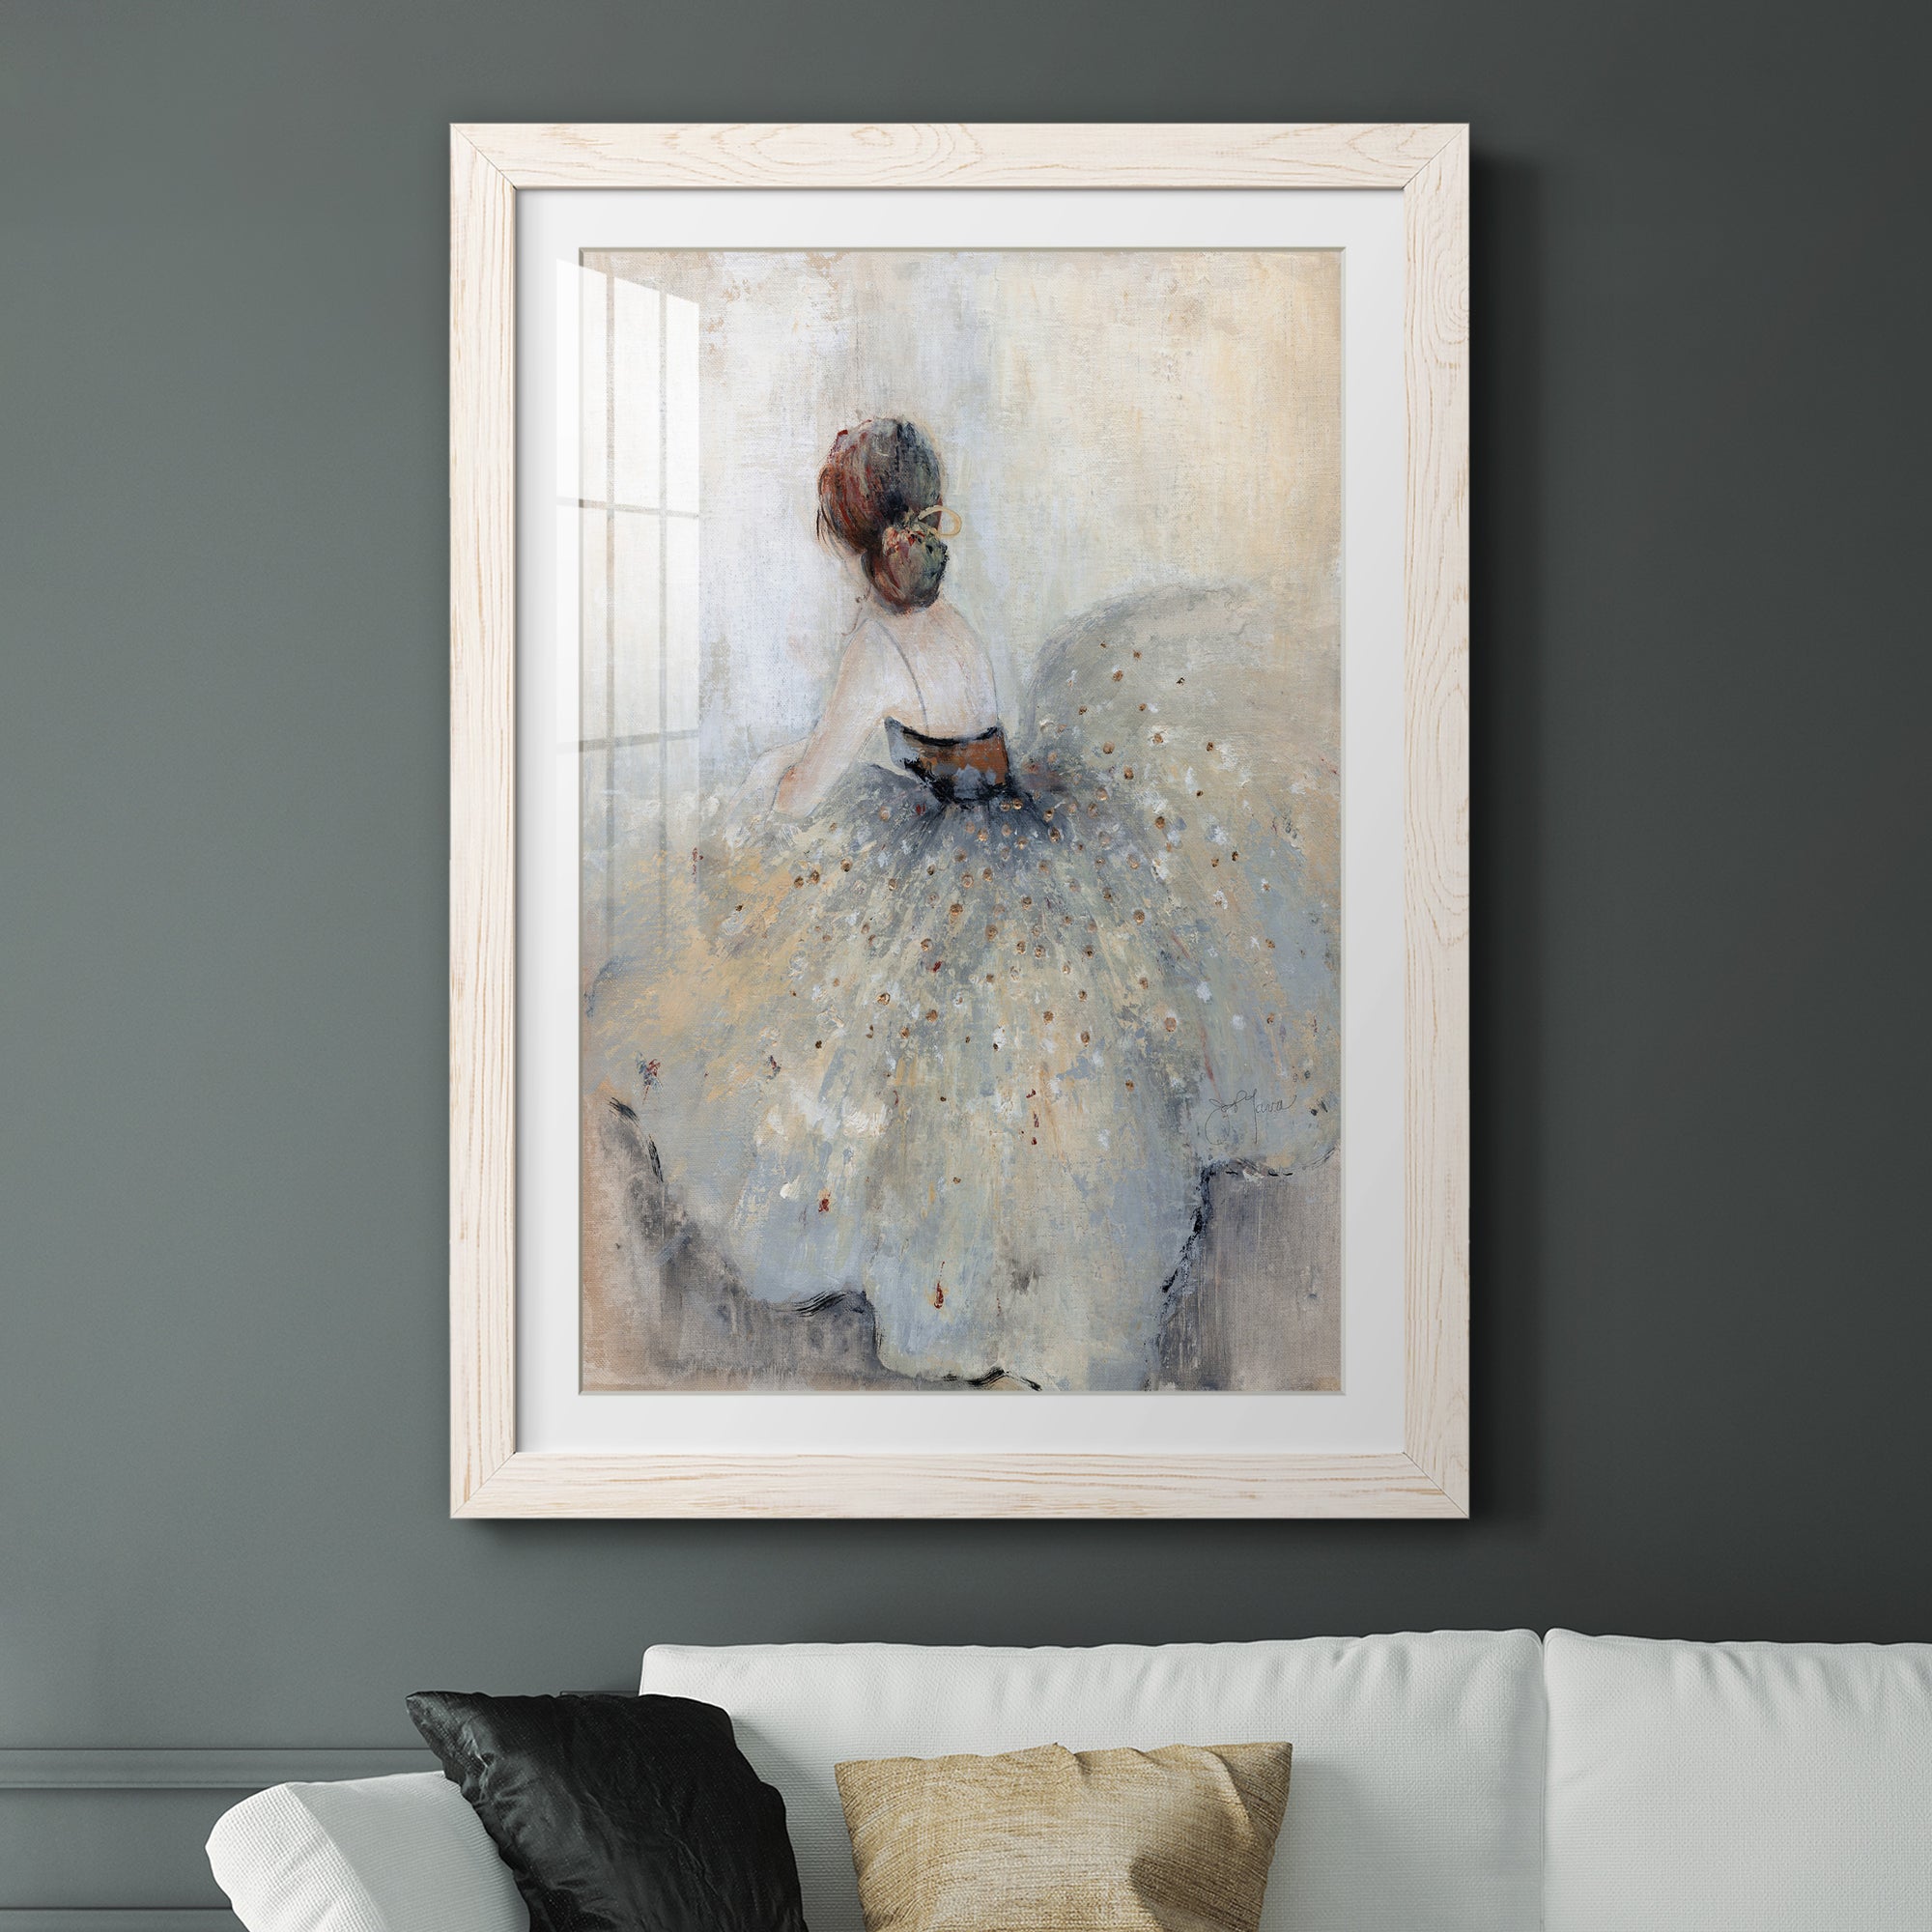 At A Glance - Premium Framed Print - Distressed Barnwood Frame - Ready to Hang